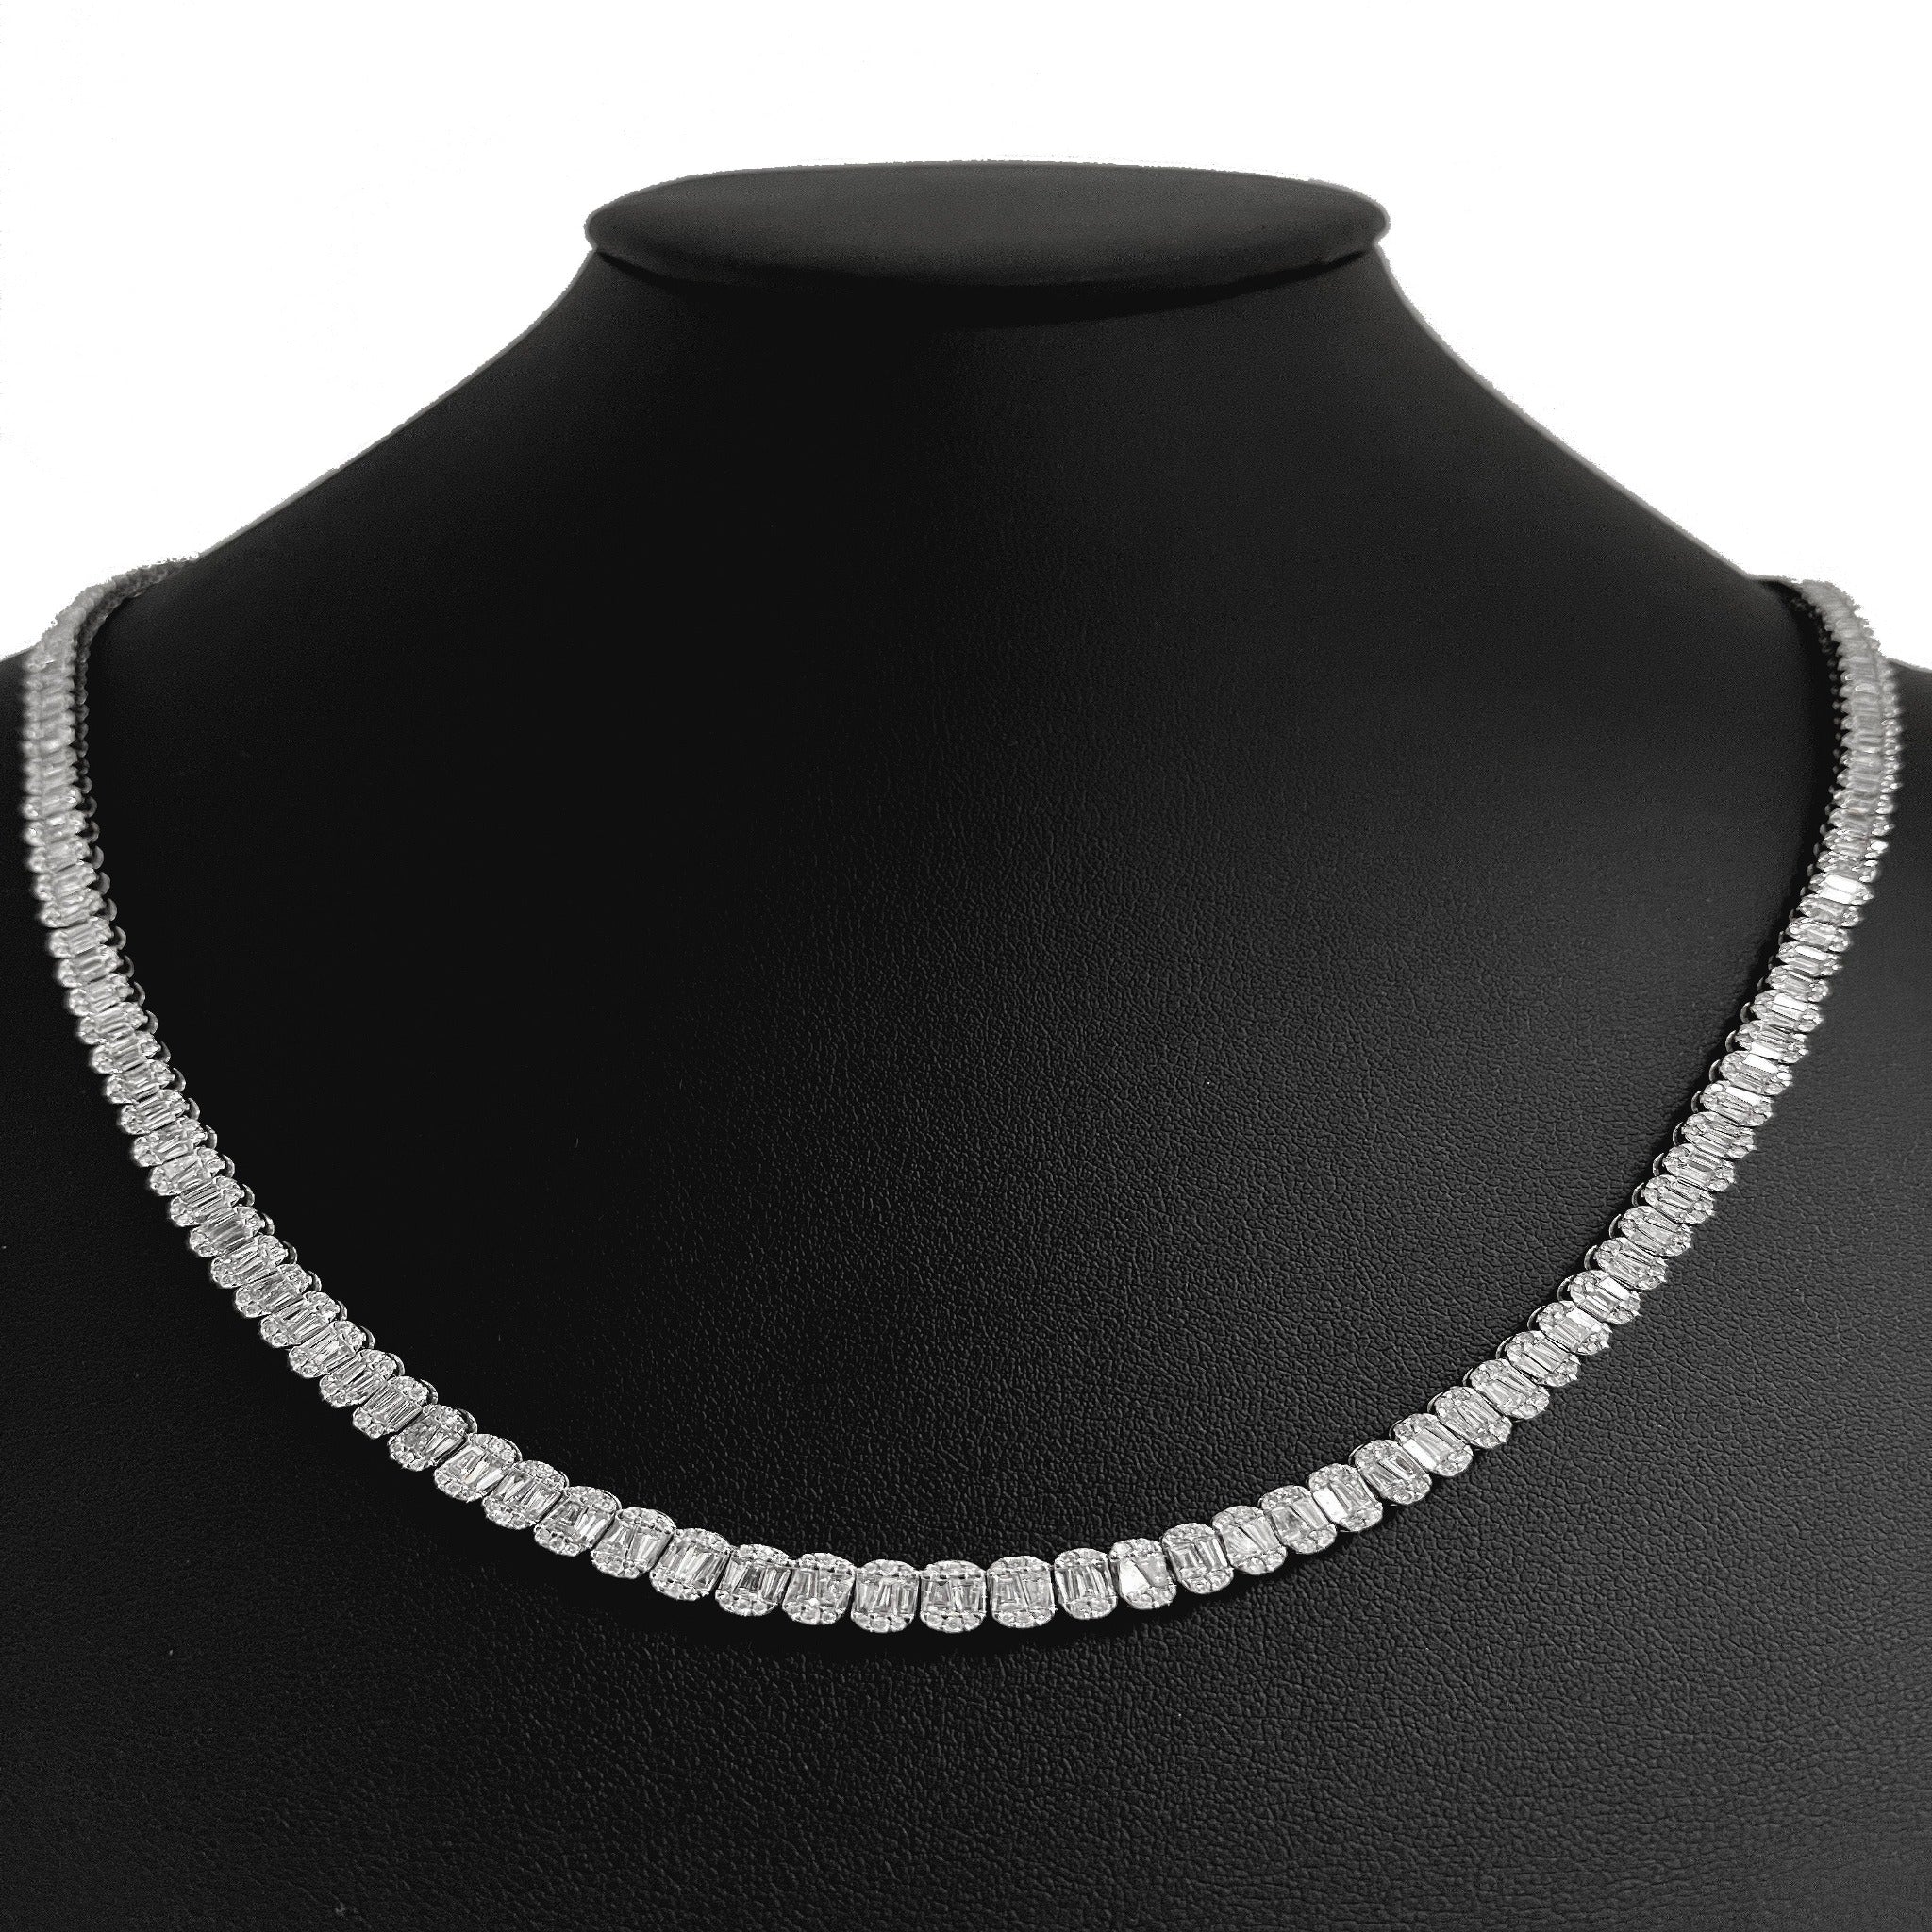 ''SPECIAL! 8.38ct G SI 14K White GOLD Round & Baguette Diamond Tennis Necklace 18'''' Long''